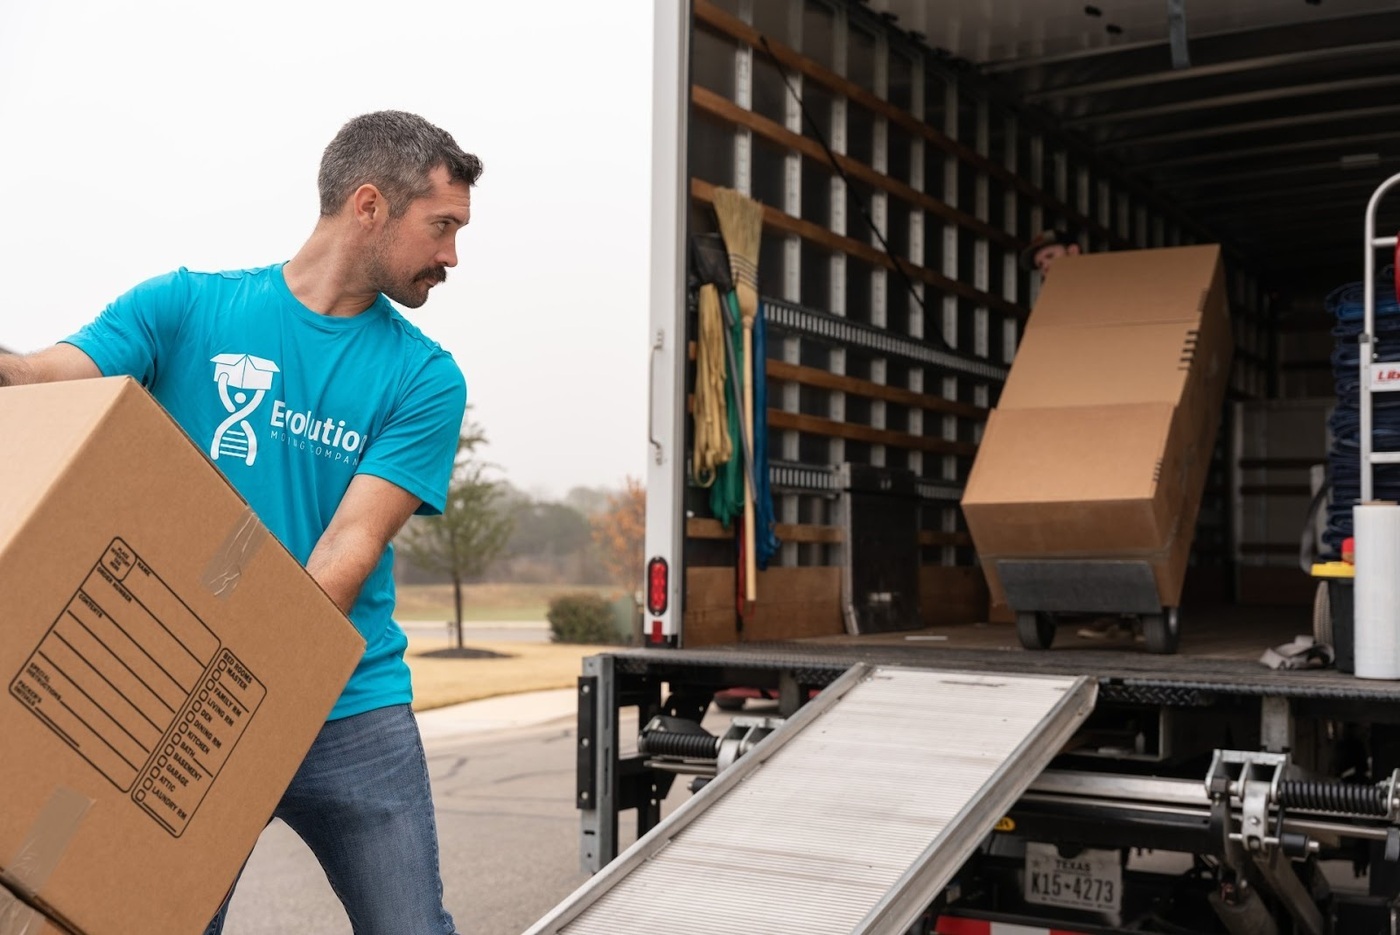 Evolution Moving Company in Fort Worth, TX, is family-owned and operated, providing local moving and storage services across Texas and beyond.